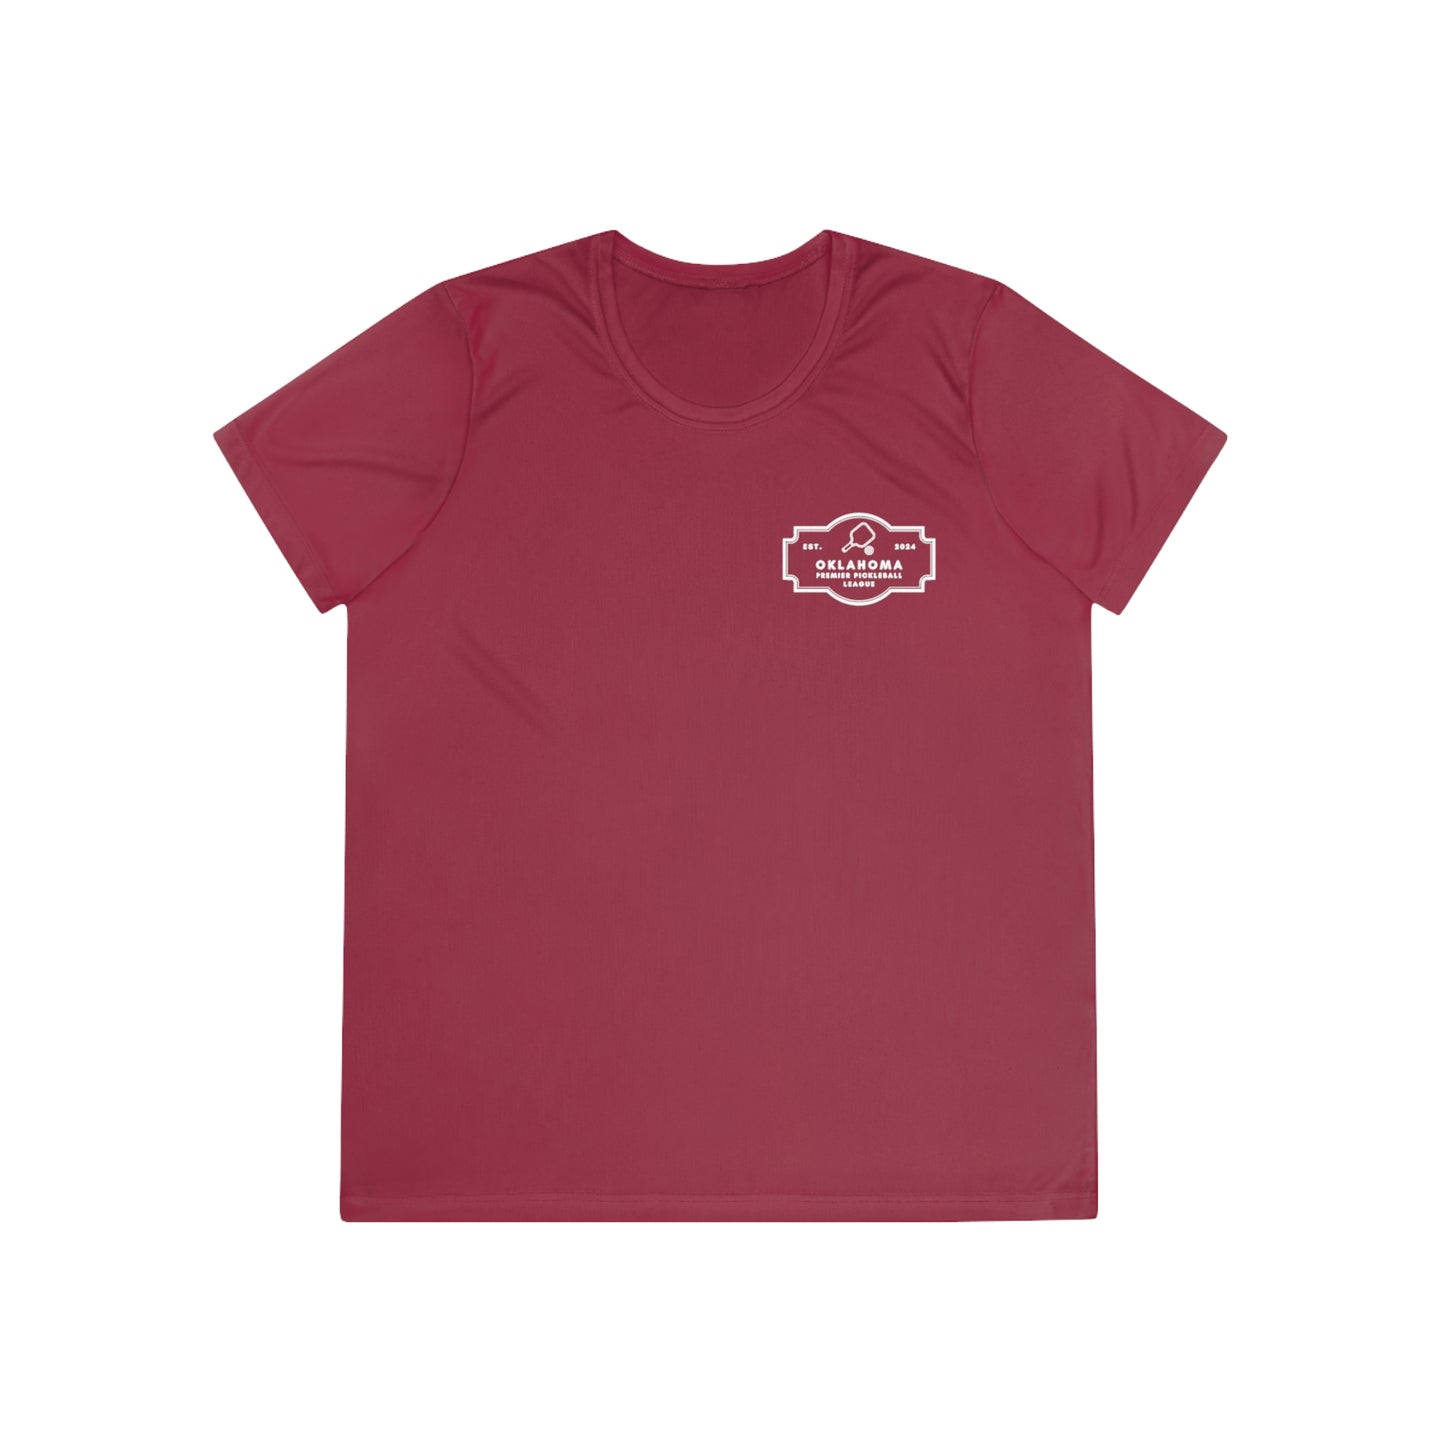 OPPL SPF 40, Moisture Wicking Ladies Competitor Tee - can customize back!